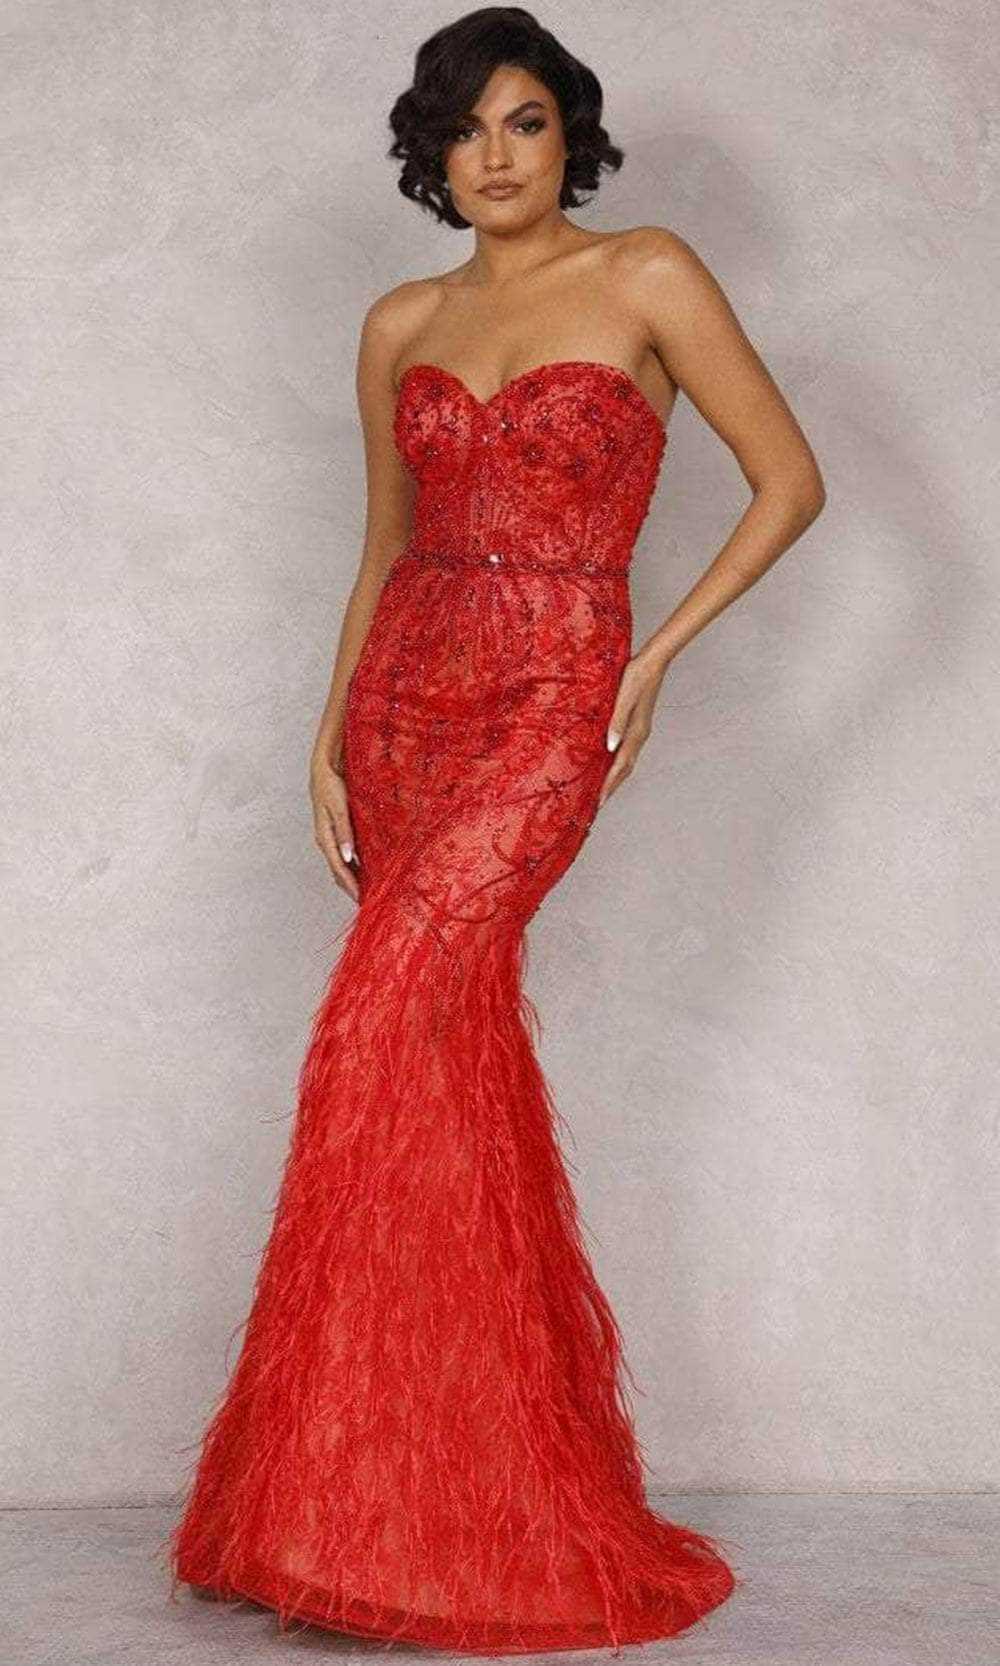 Terani Couture, Terani Couture 2221GL0414 - Strapless Feather Trumpet Evening Dress